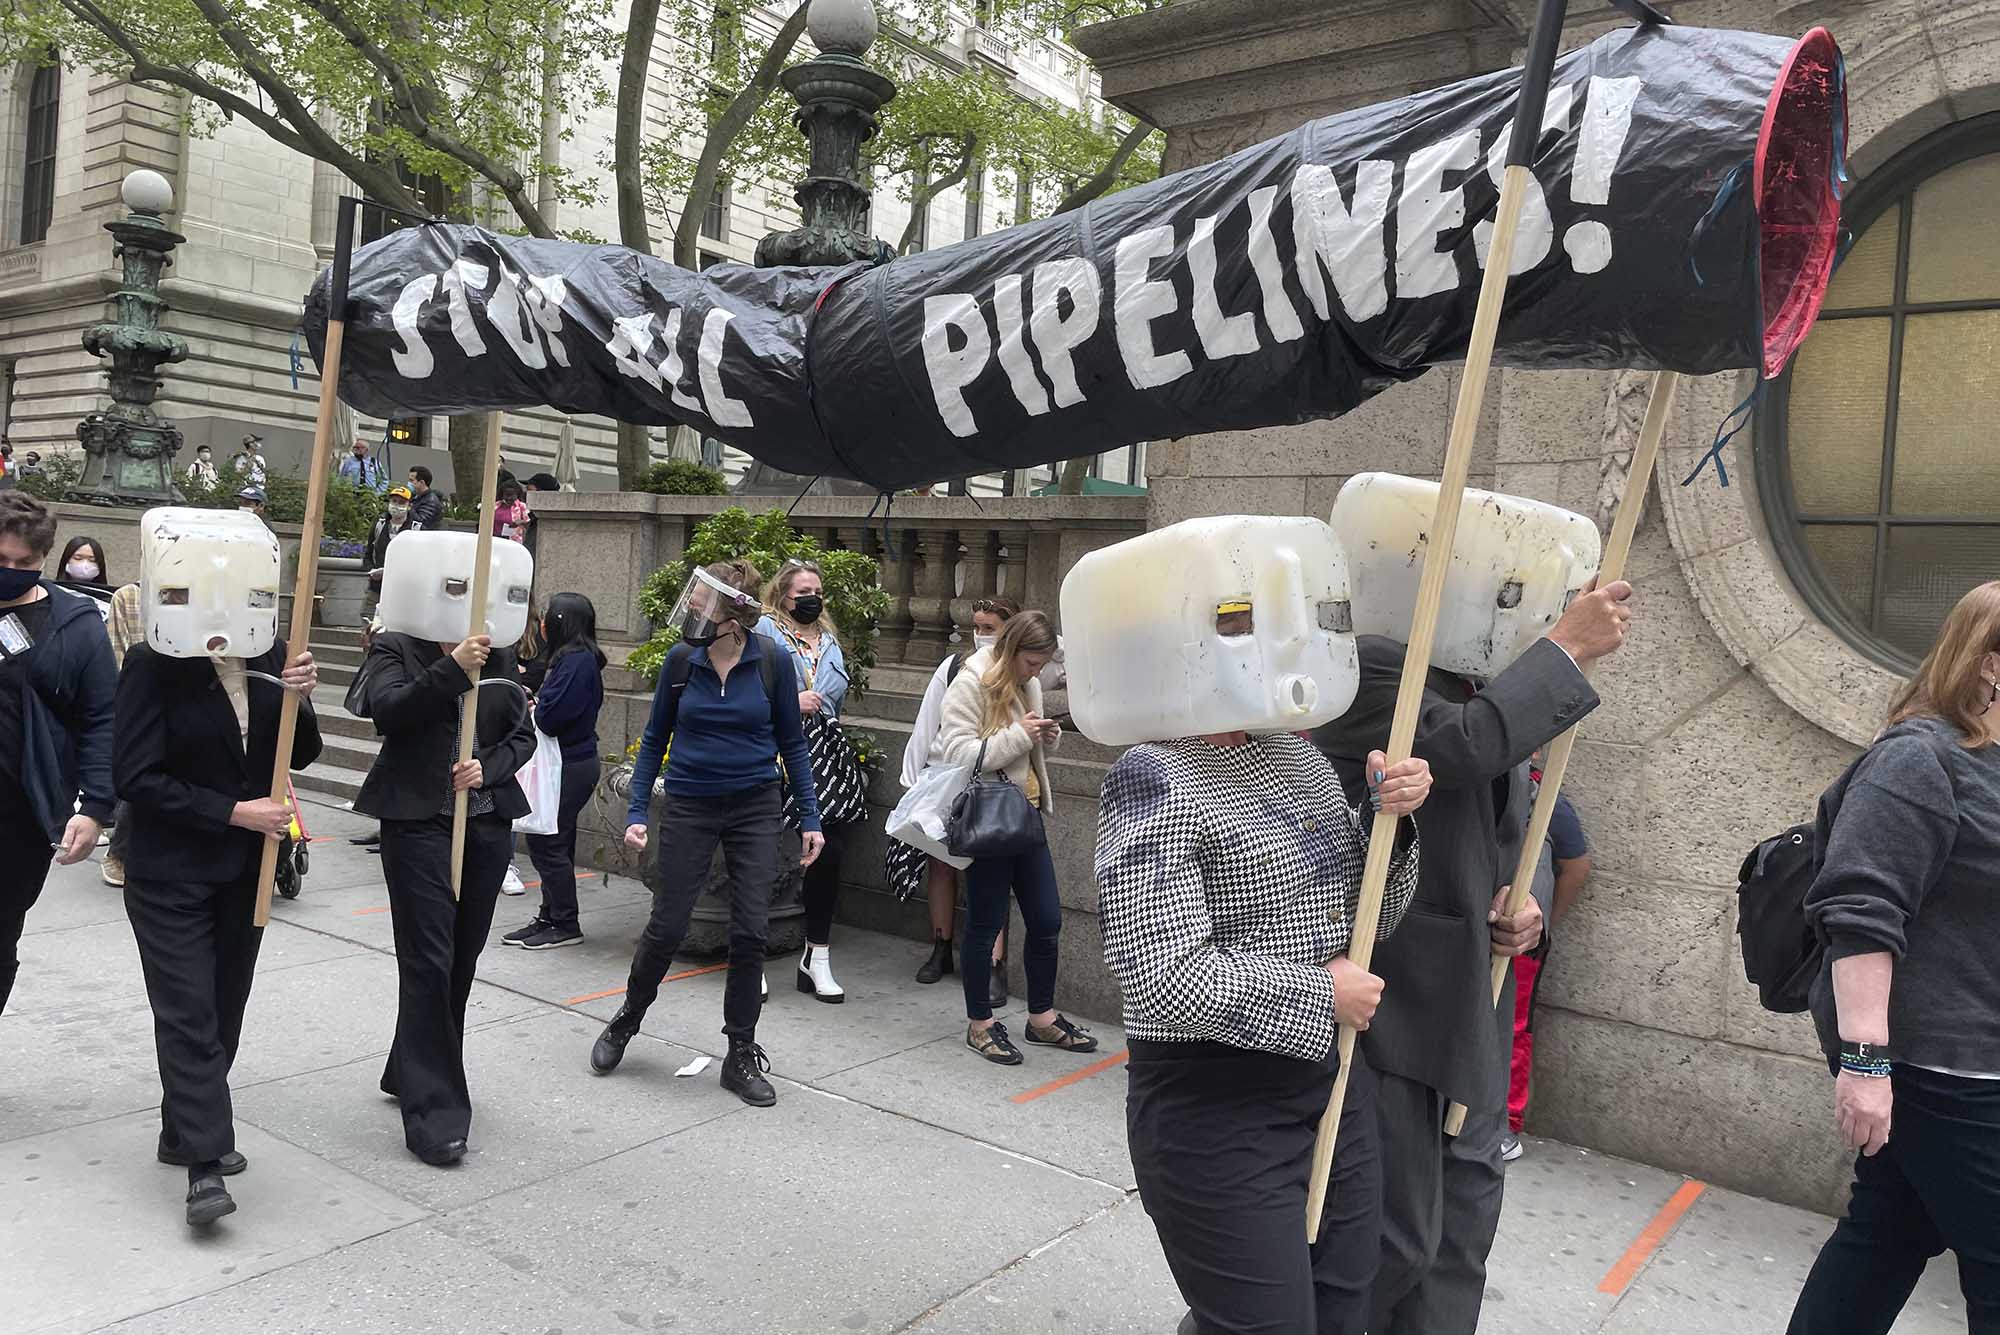 A group of environmentalists protesting the Keystone Oil Pipeline in Boston